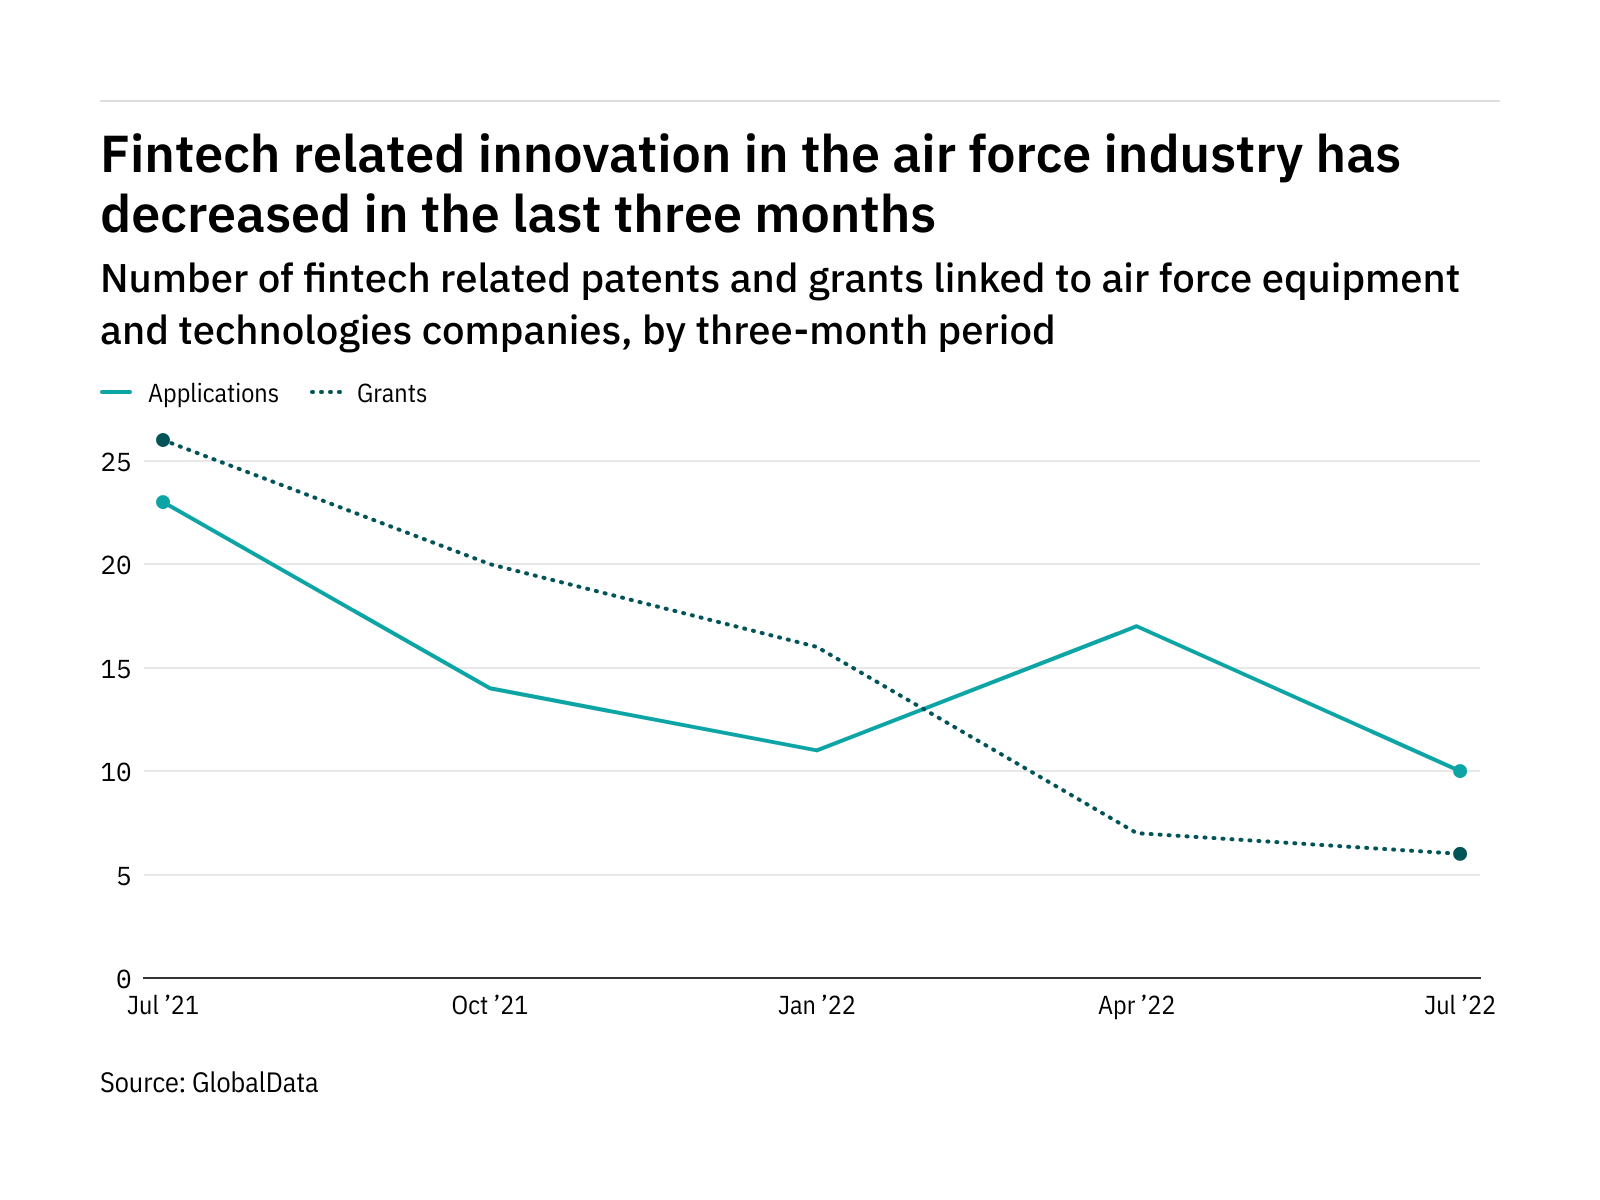 Fintech innovation among air force industry companies has dropped off in the last three months